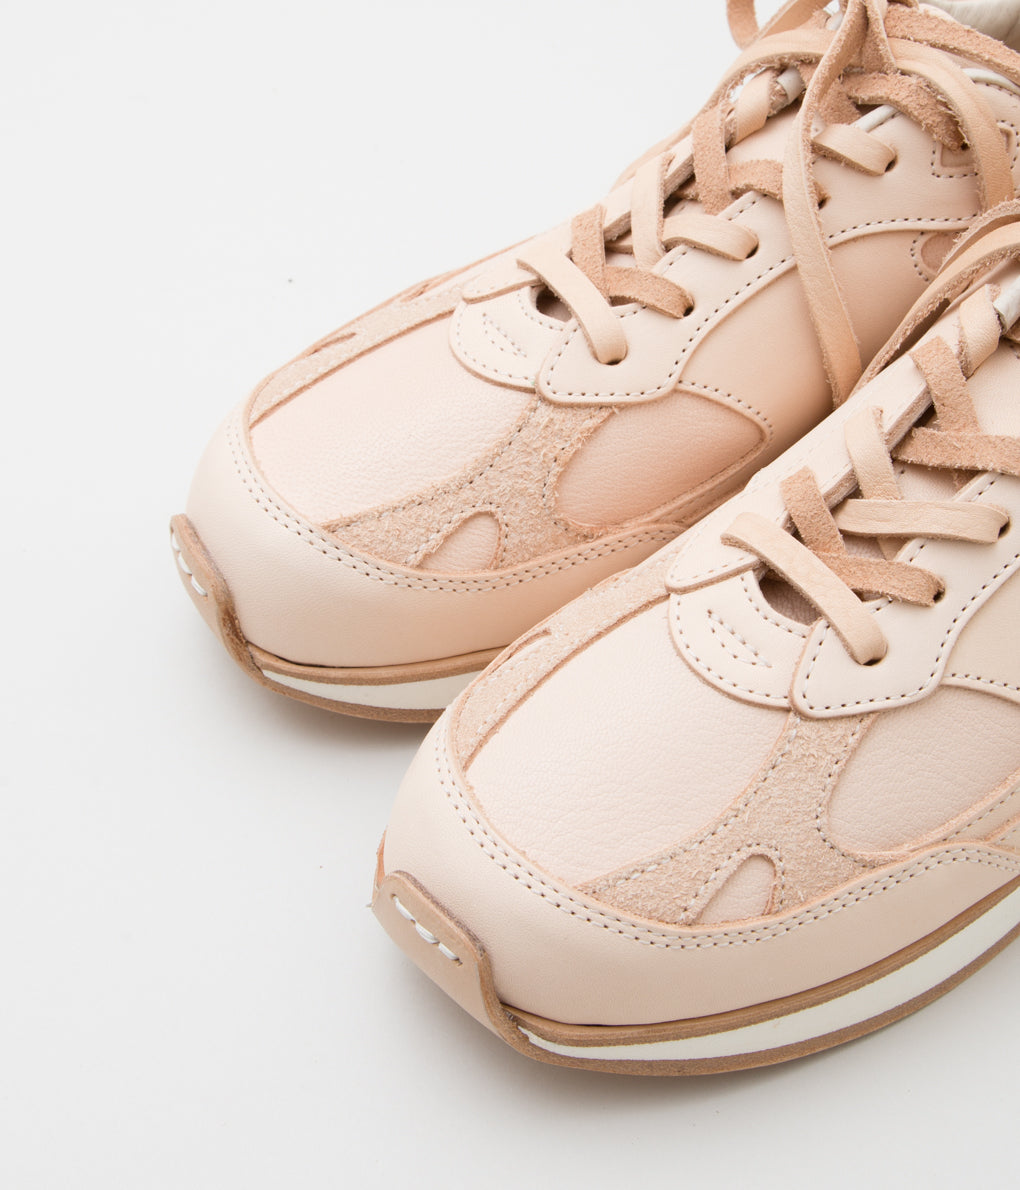 HENDER SCHEME "manual industrial products 28"(NATURAL)